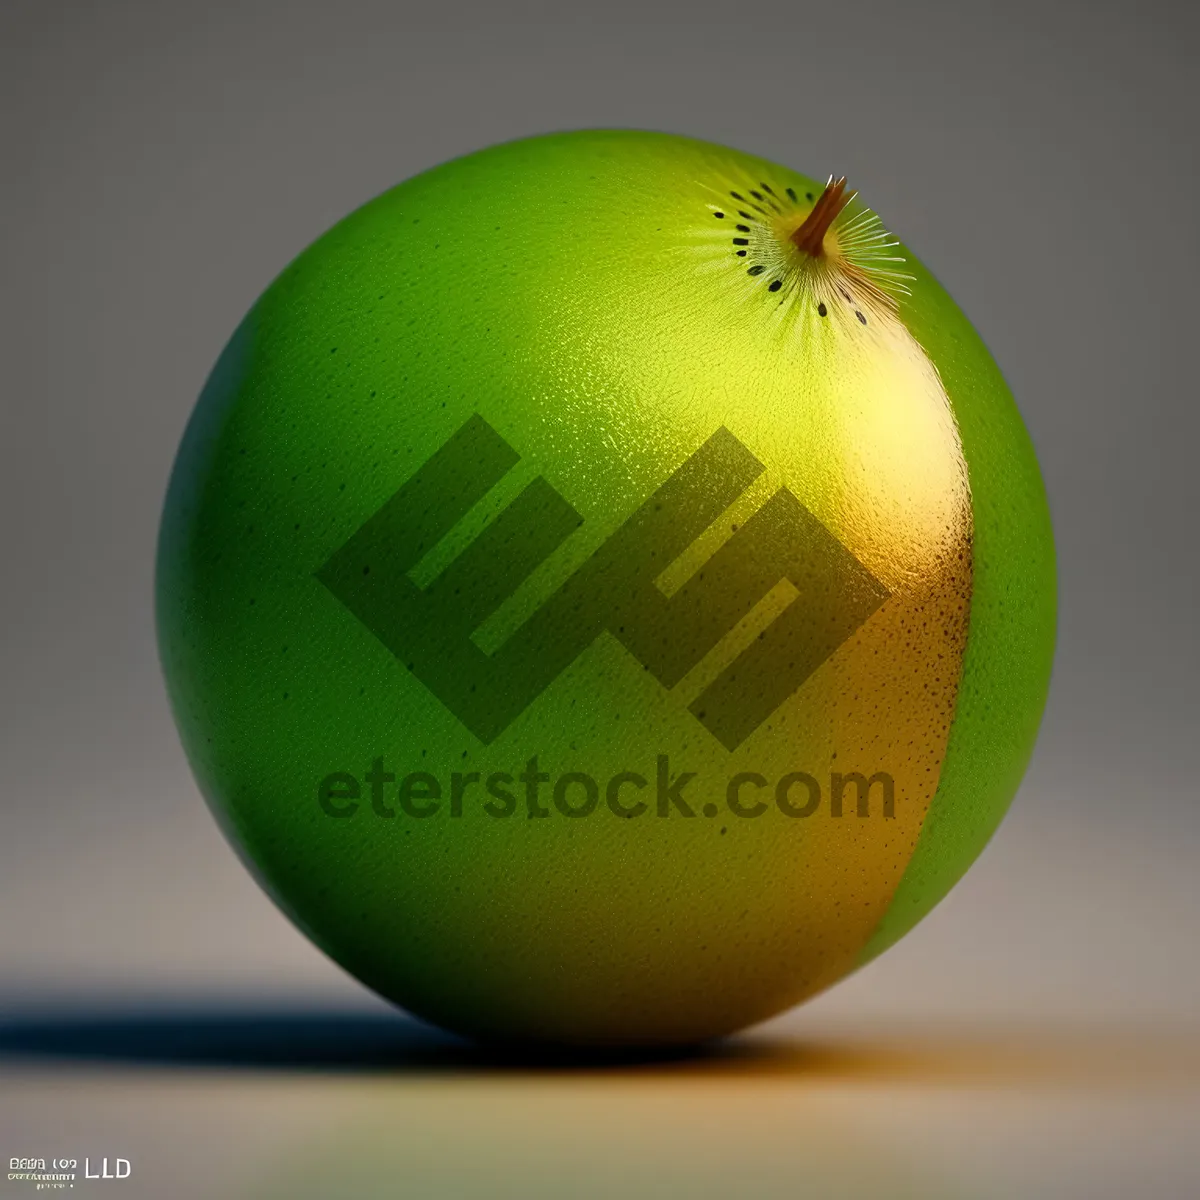 Picture of Delicious Granny Smith Apple: Fresh, Healthy, and Nutritious